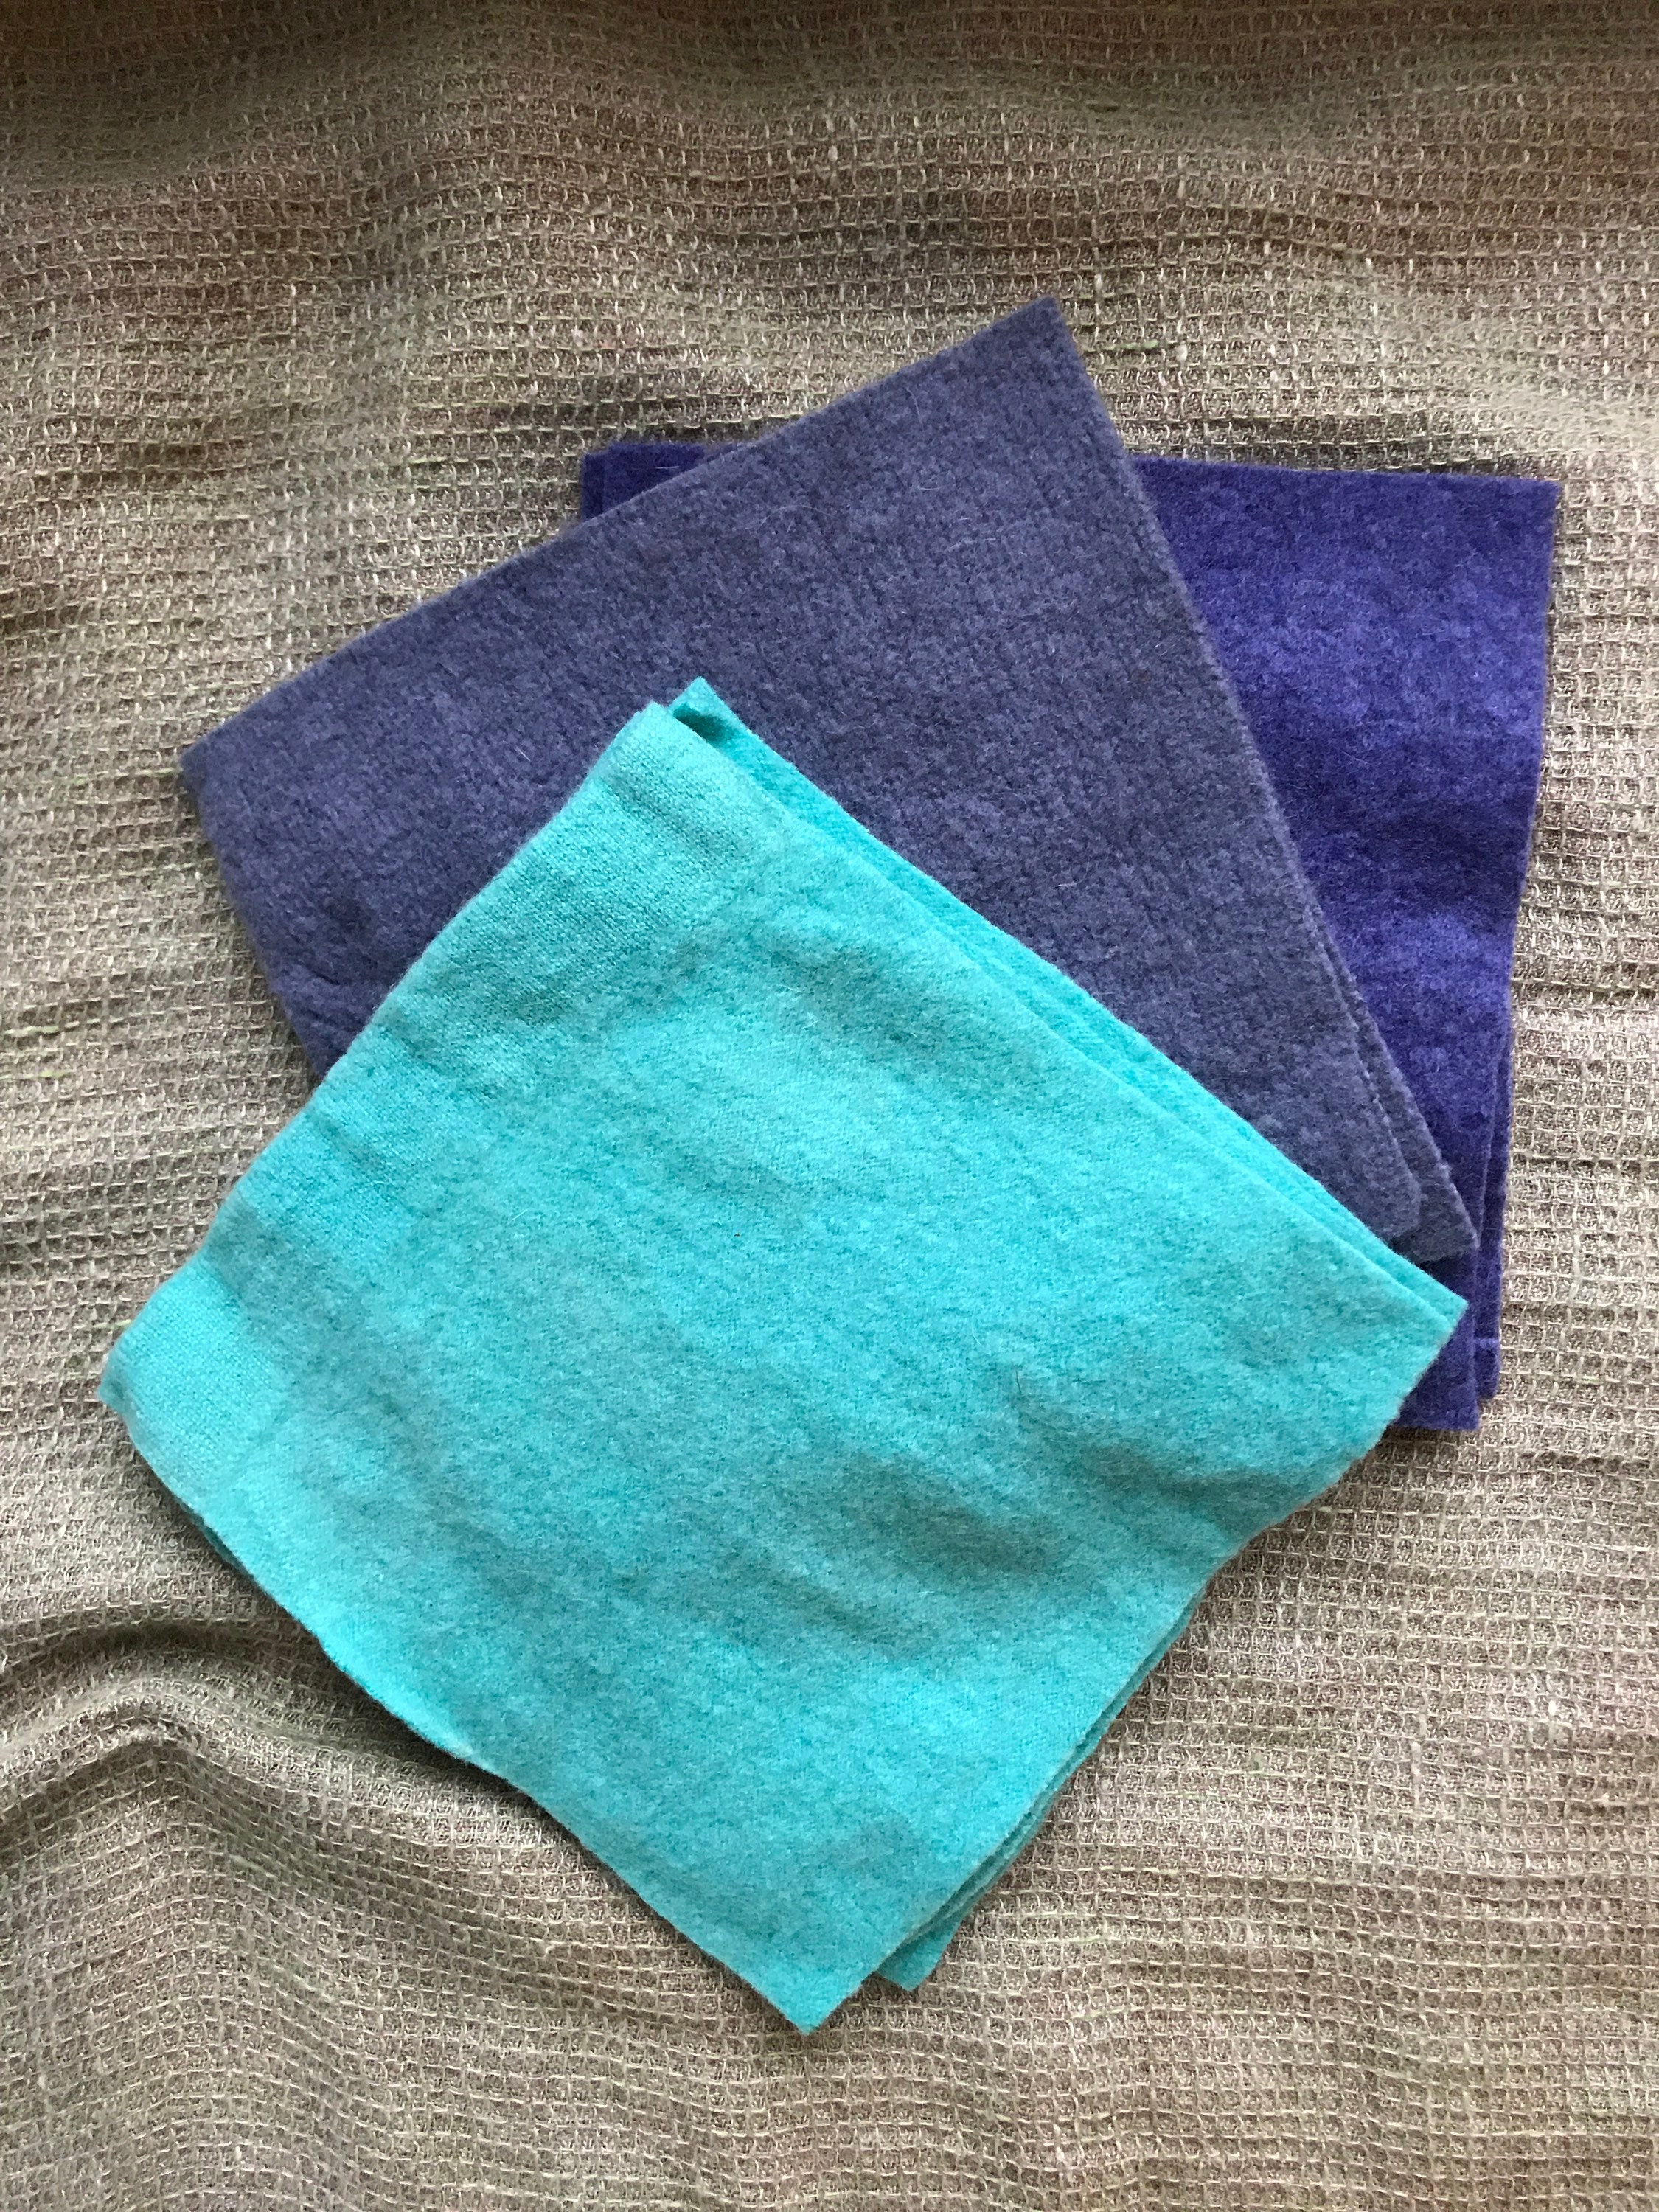 Chemex Sweater Cozy and Warming Pad-Repurposed Felted Cashmere